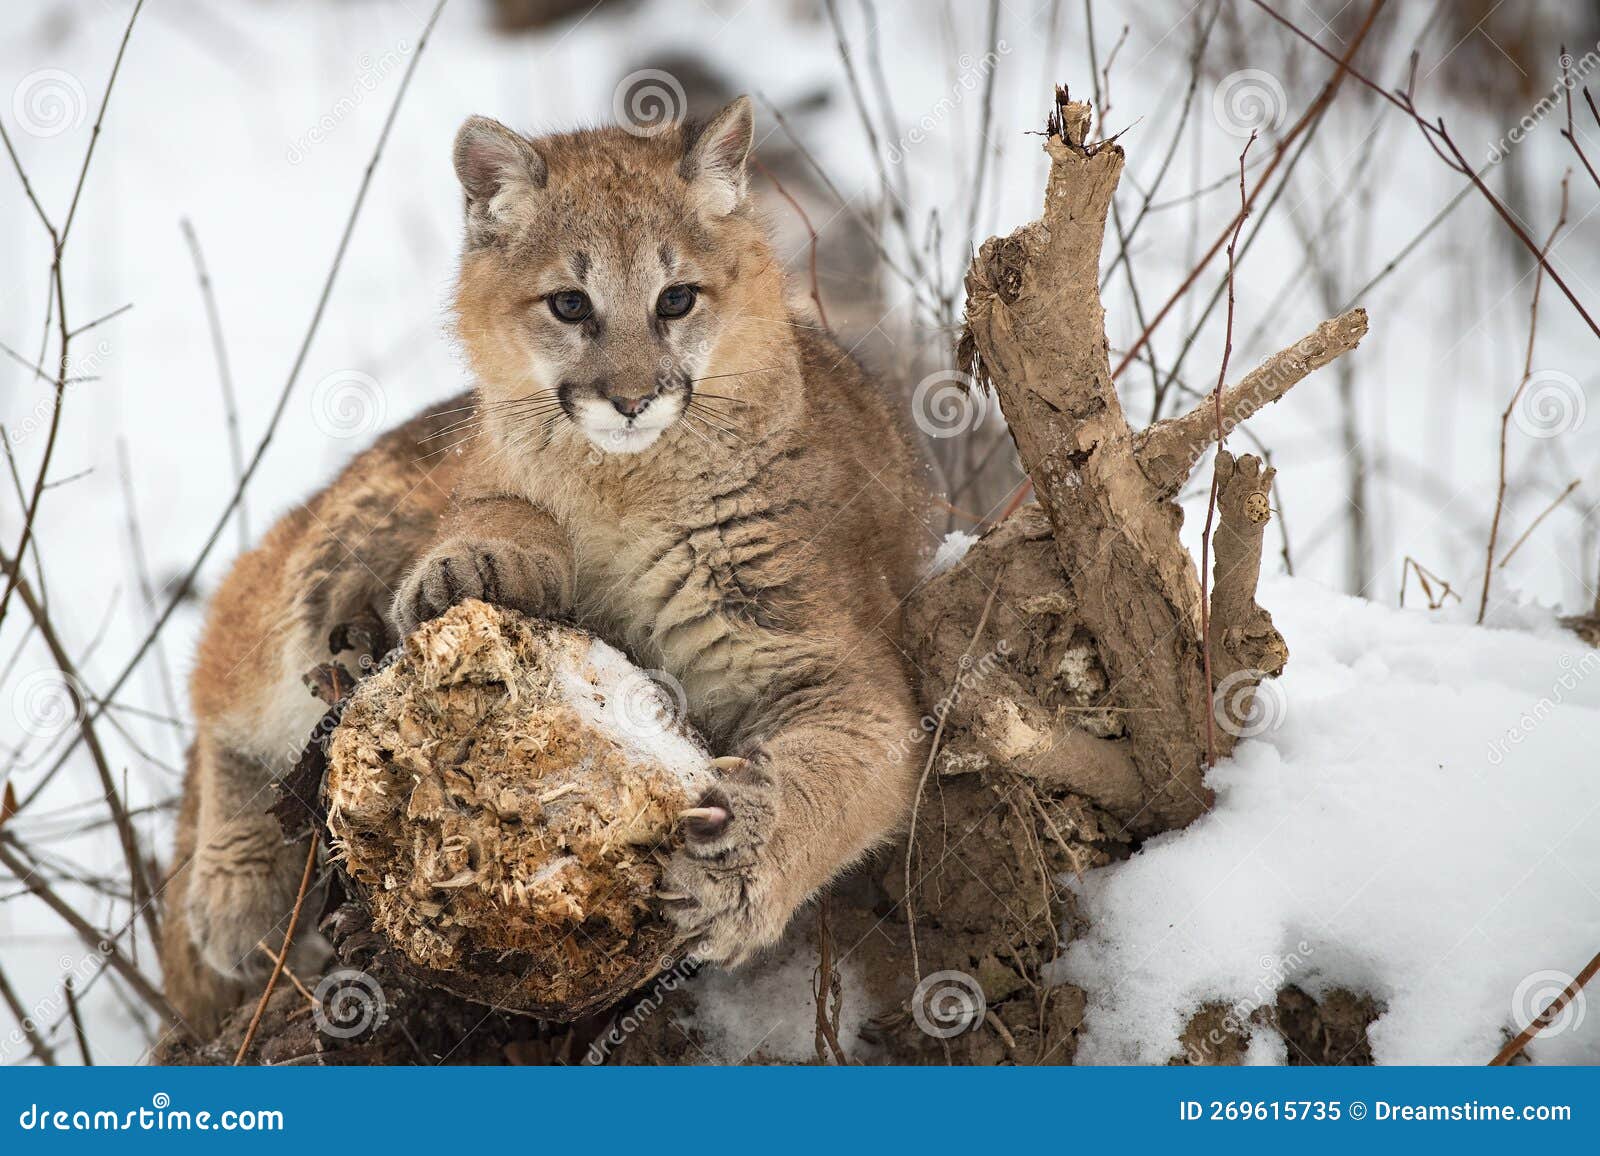 Female Cougar (Puma Concolor) Pauses To Look while Sharpening Claws on ...